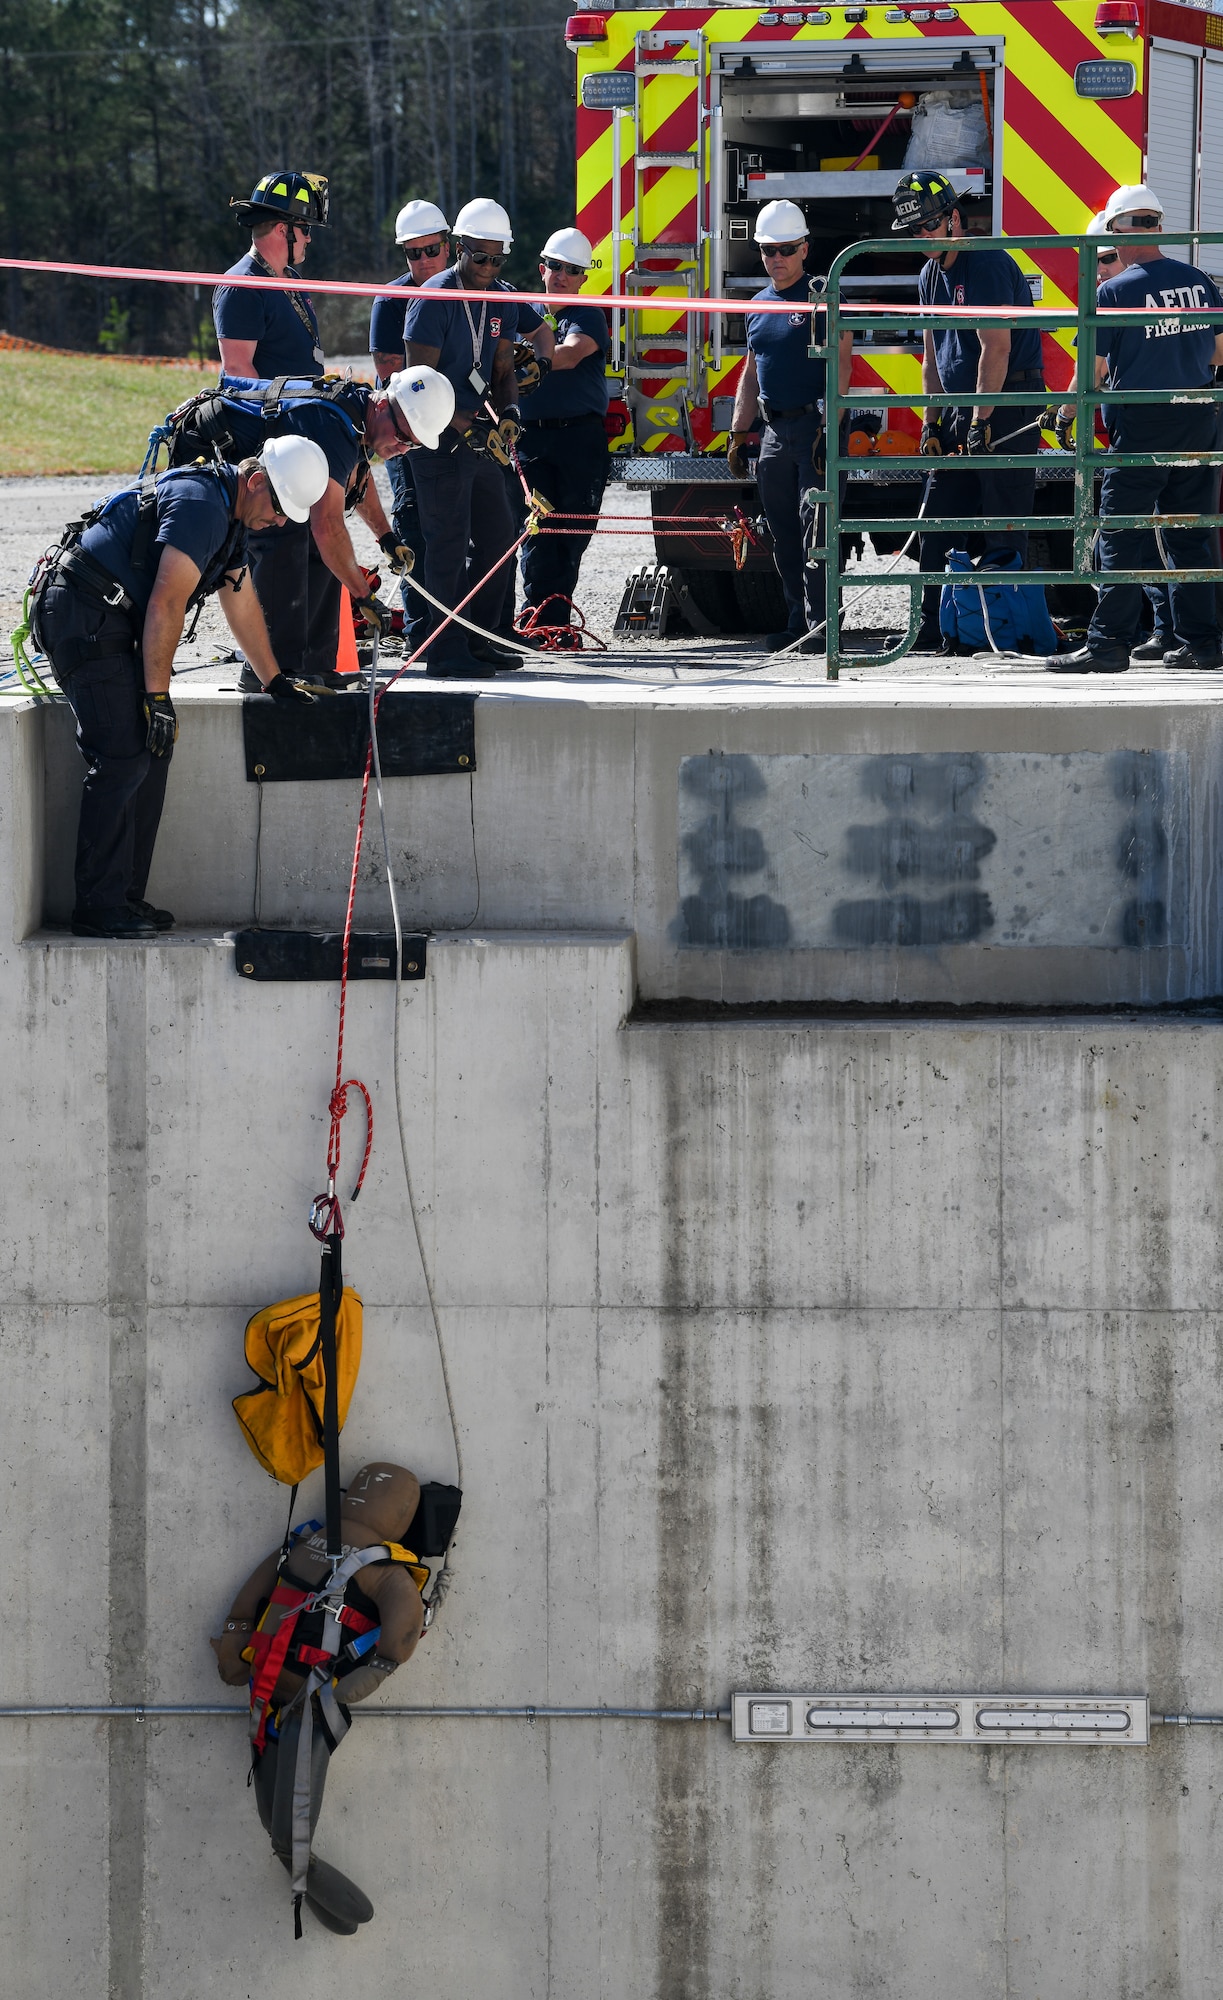 Training dummy being lifted via rope by firefighters